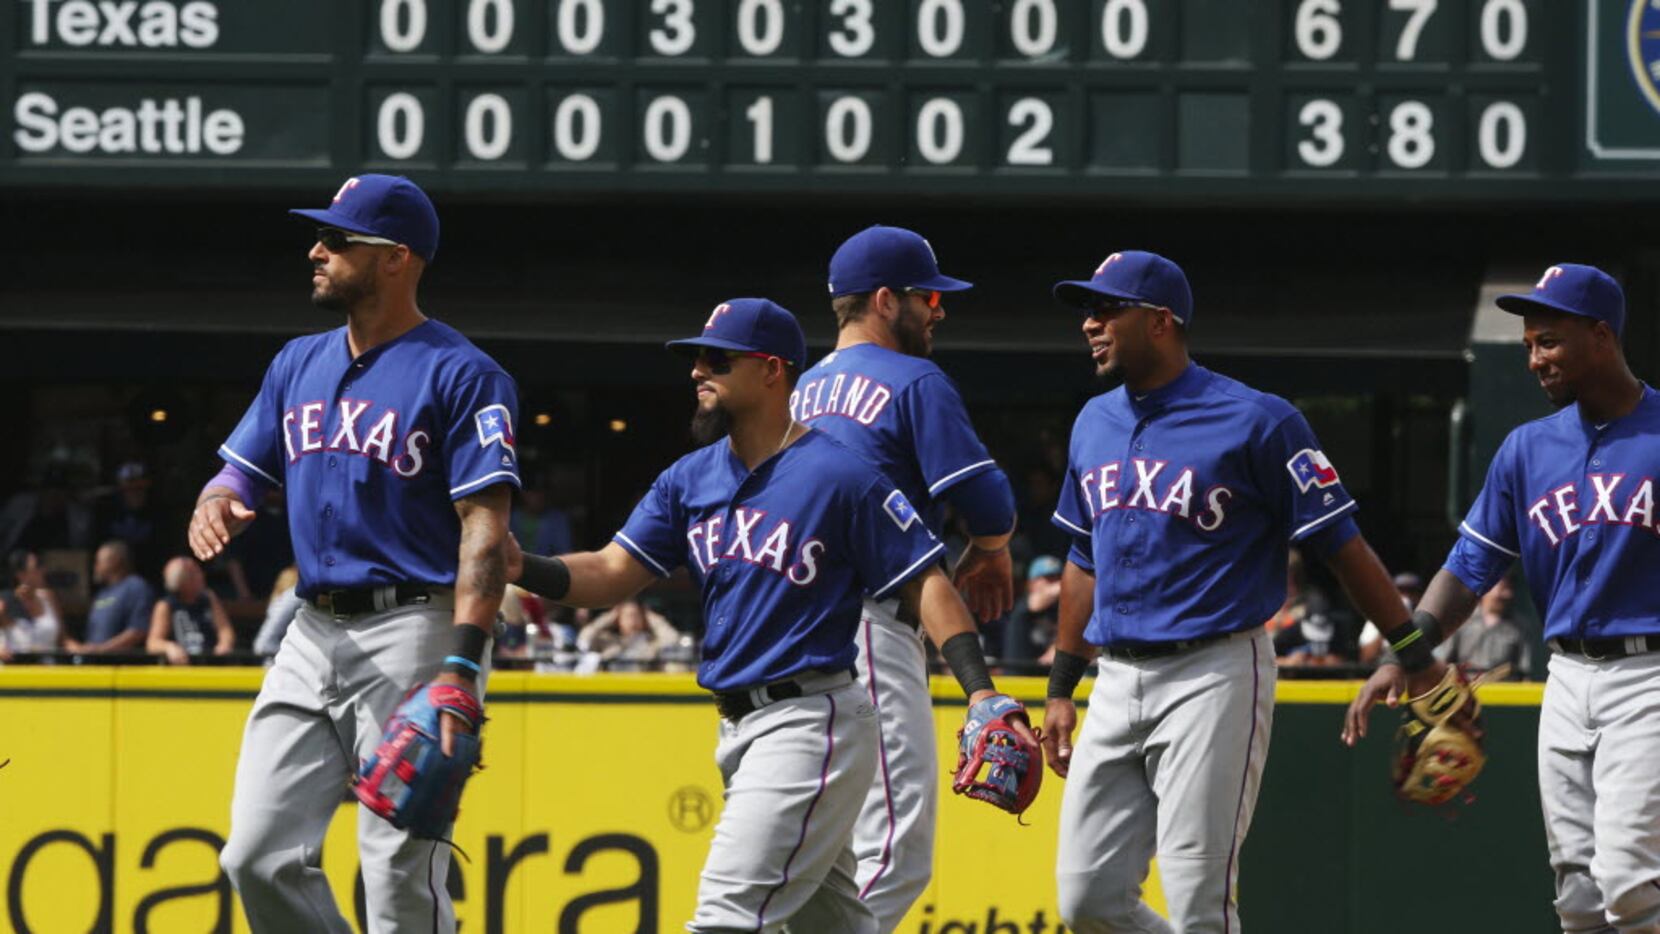 The Texas Rangers leave the field after defeating the Mariners on Sunday, June 12, 2016, at...